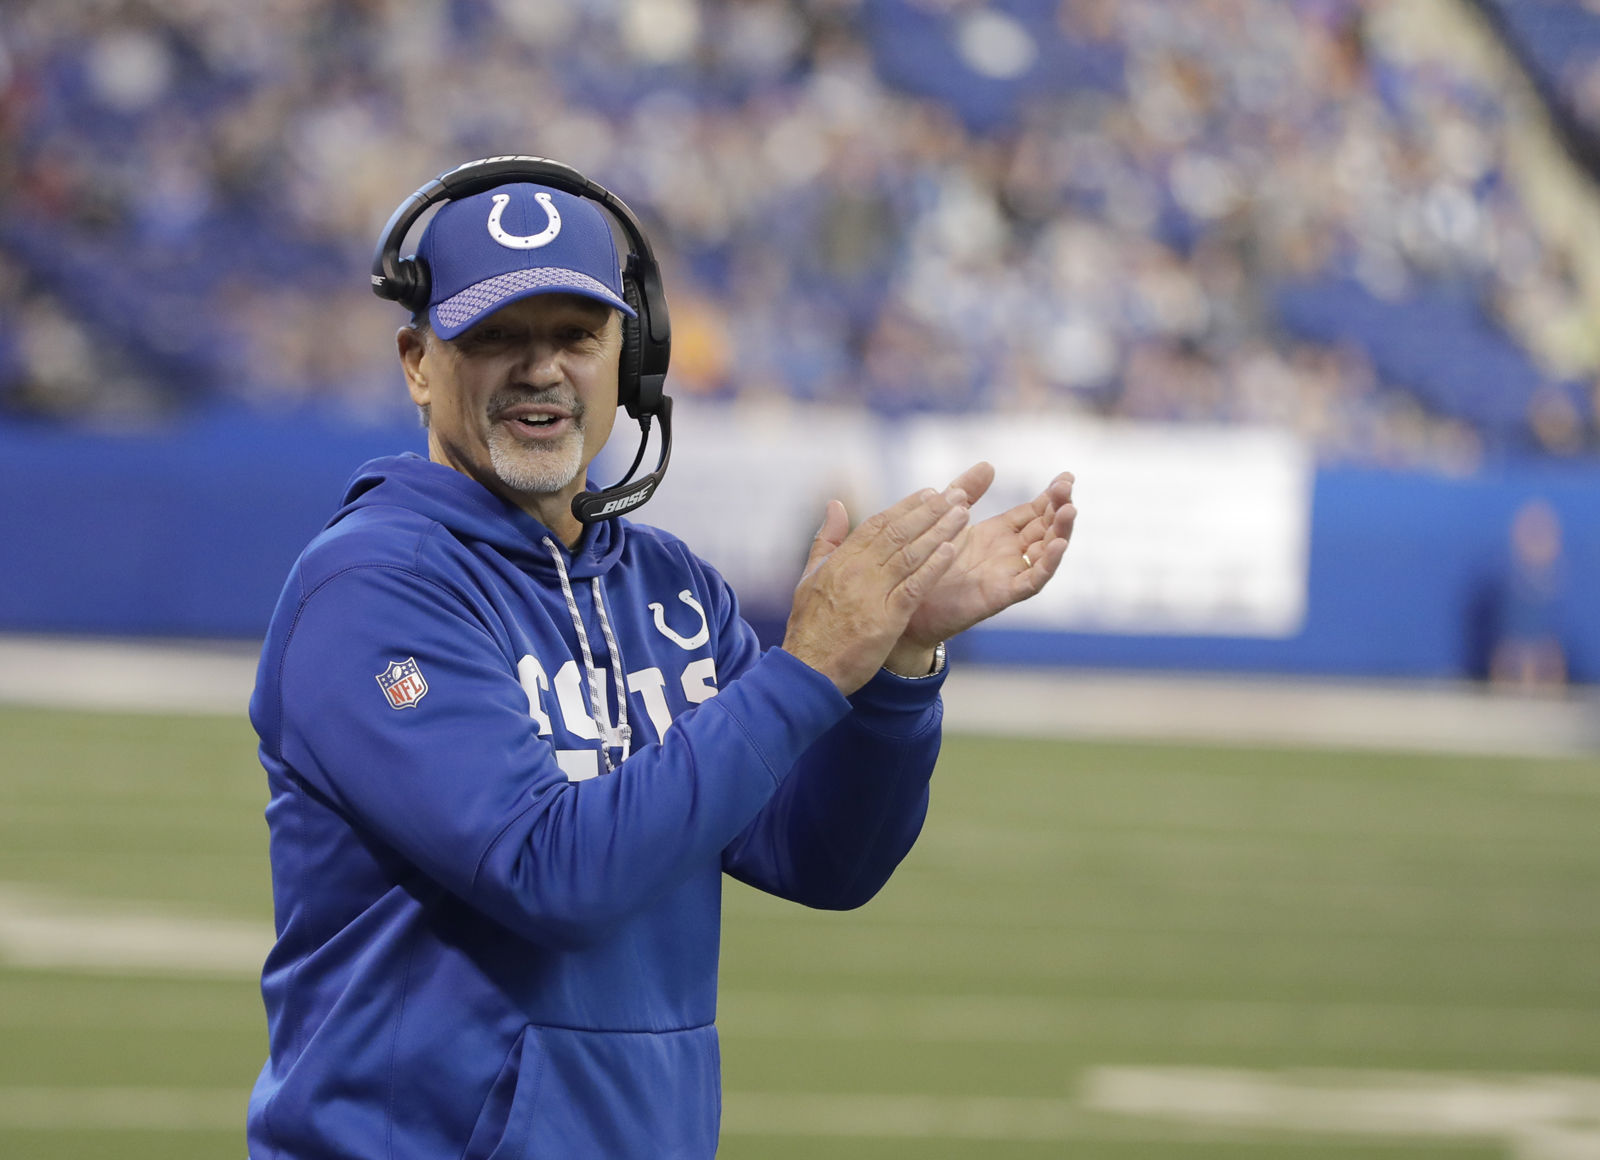 Indianapolis Colts head coach Chuck Pagano applauds during the second half of an NFL football game against the Houston Texans, Sunday, Dec. 31, 2017, in Indianapolis. Indianapolis won 22-13. (AP Photo/Darron Cummings)